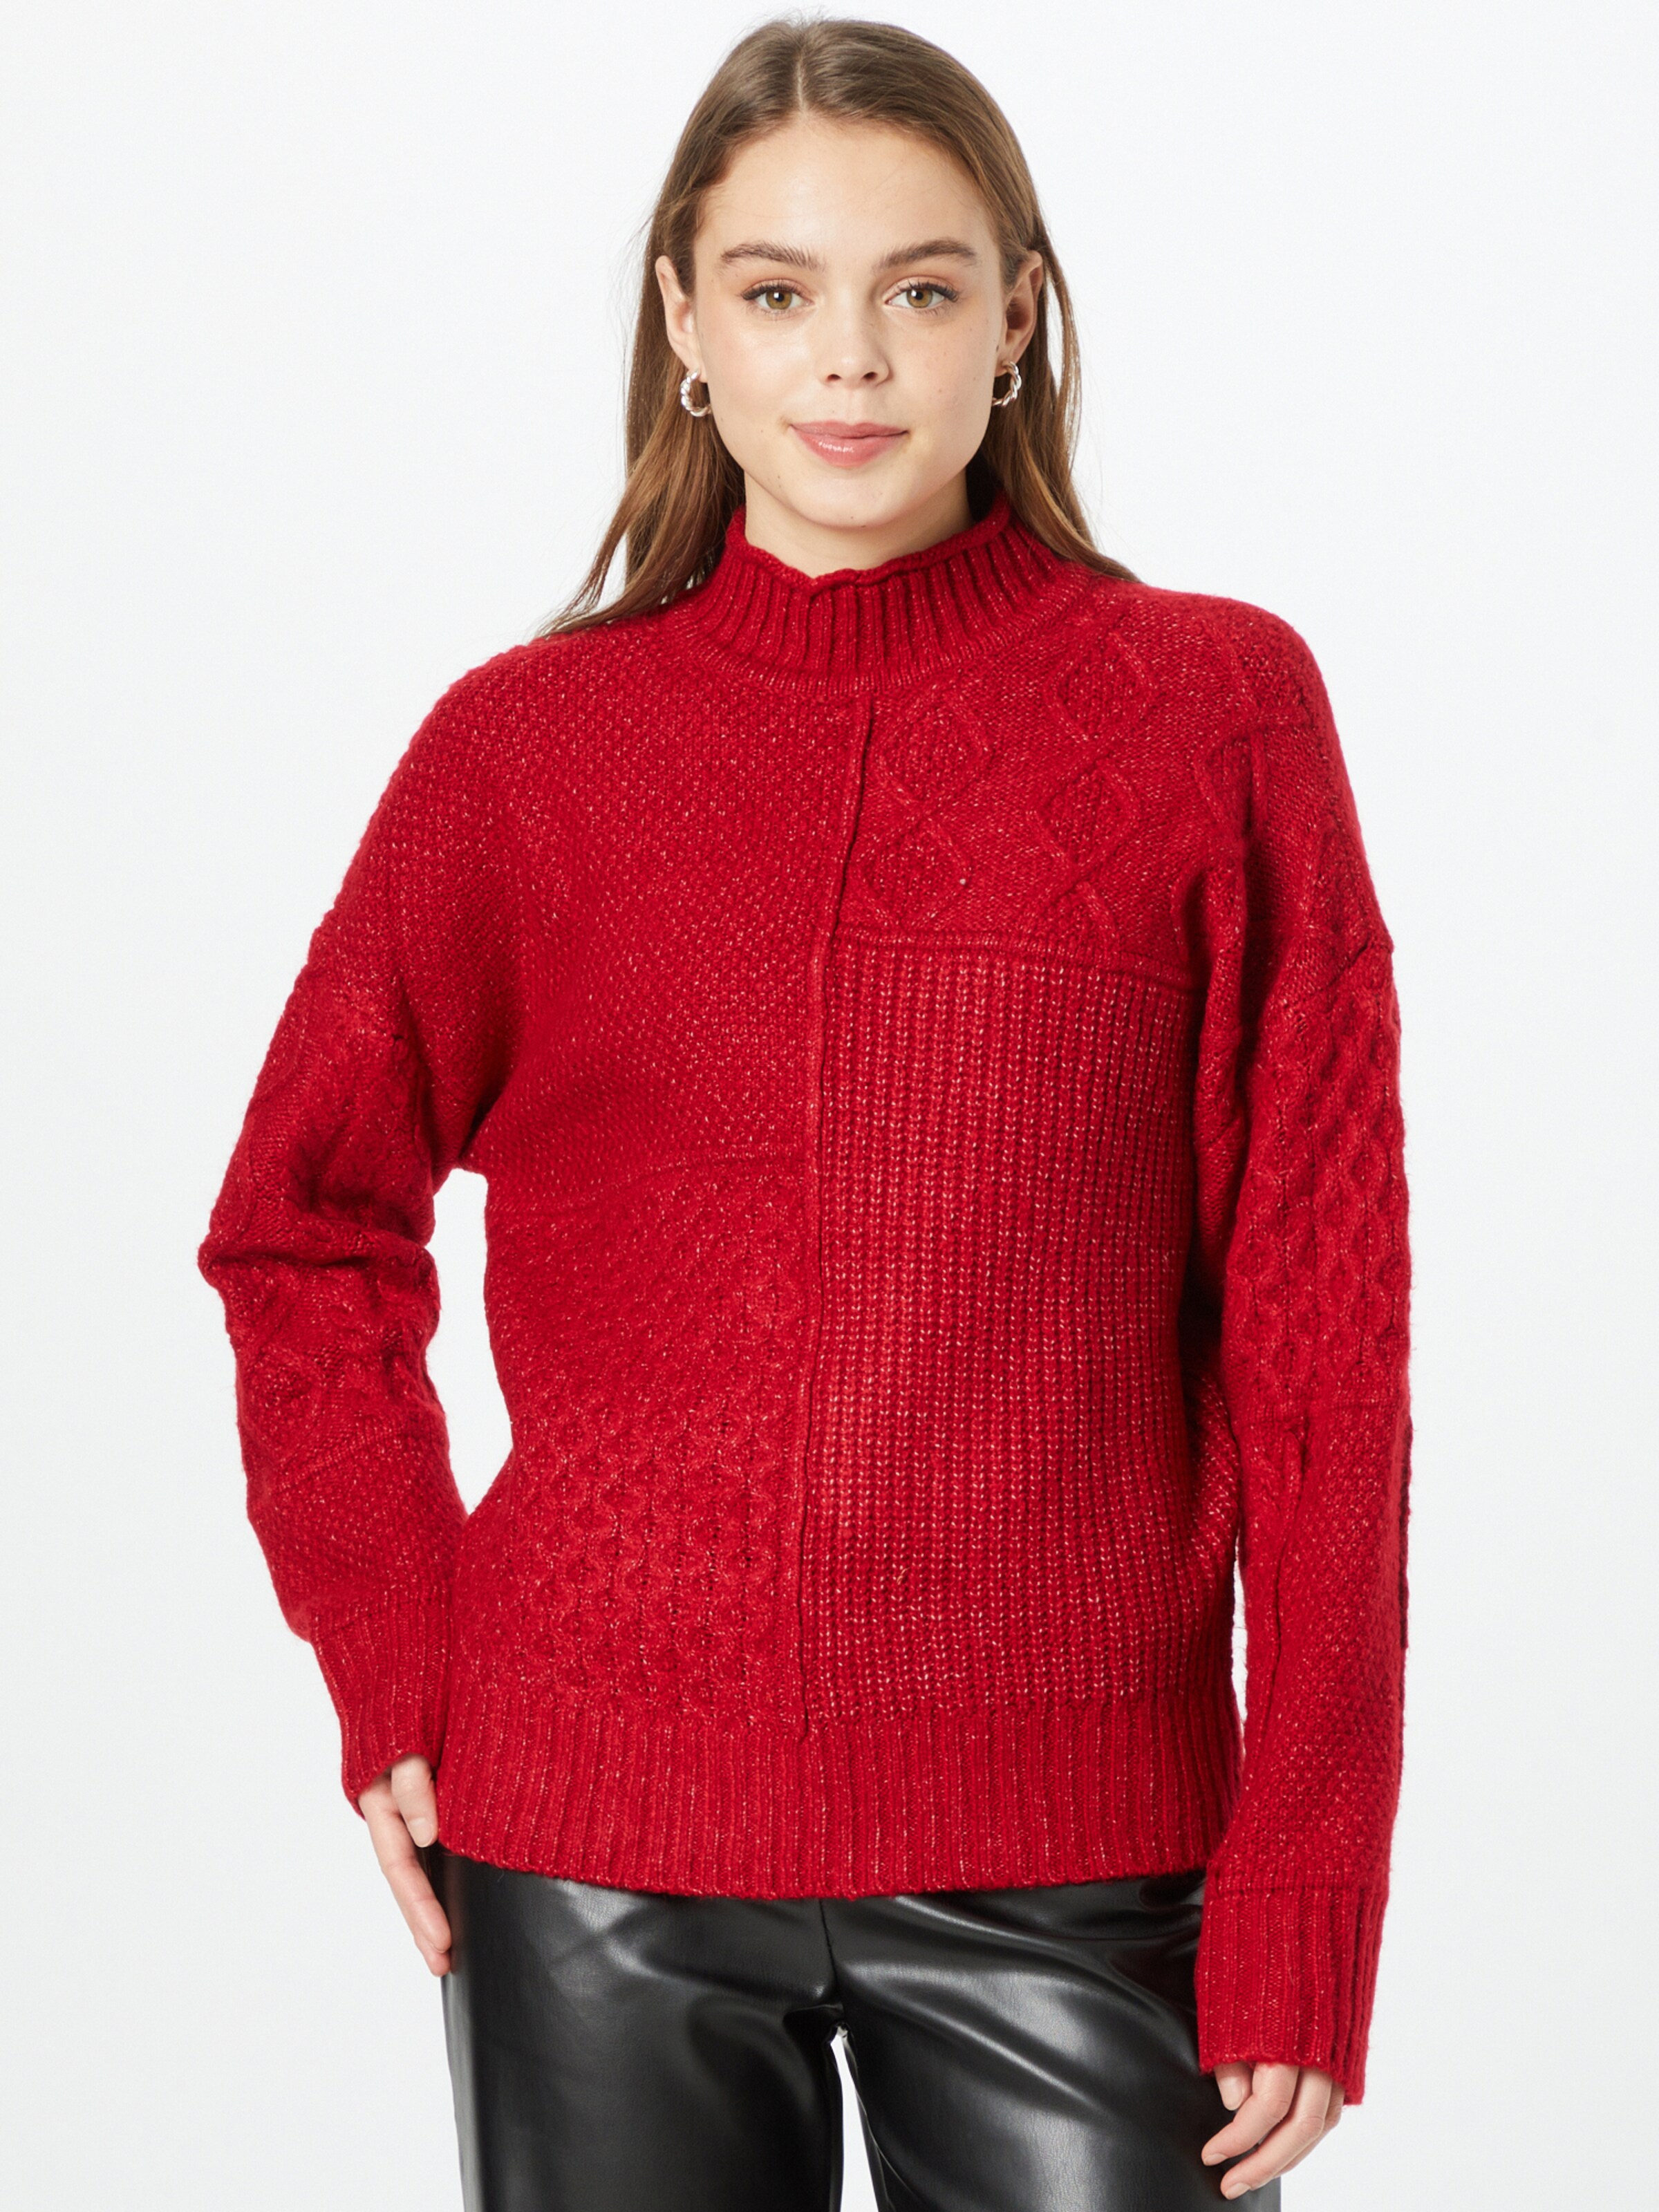 Frauen Pullover & Strick American Eagle Pullover in Rot - AD83766